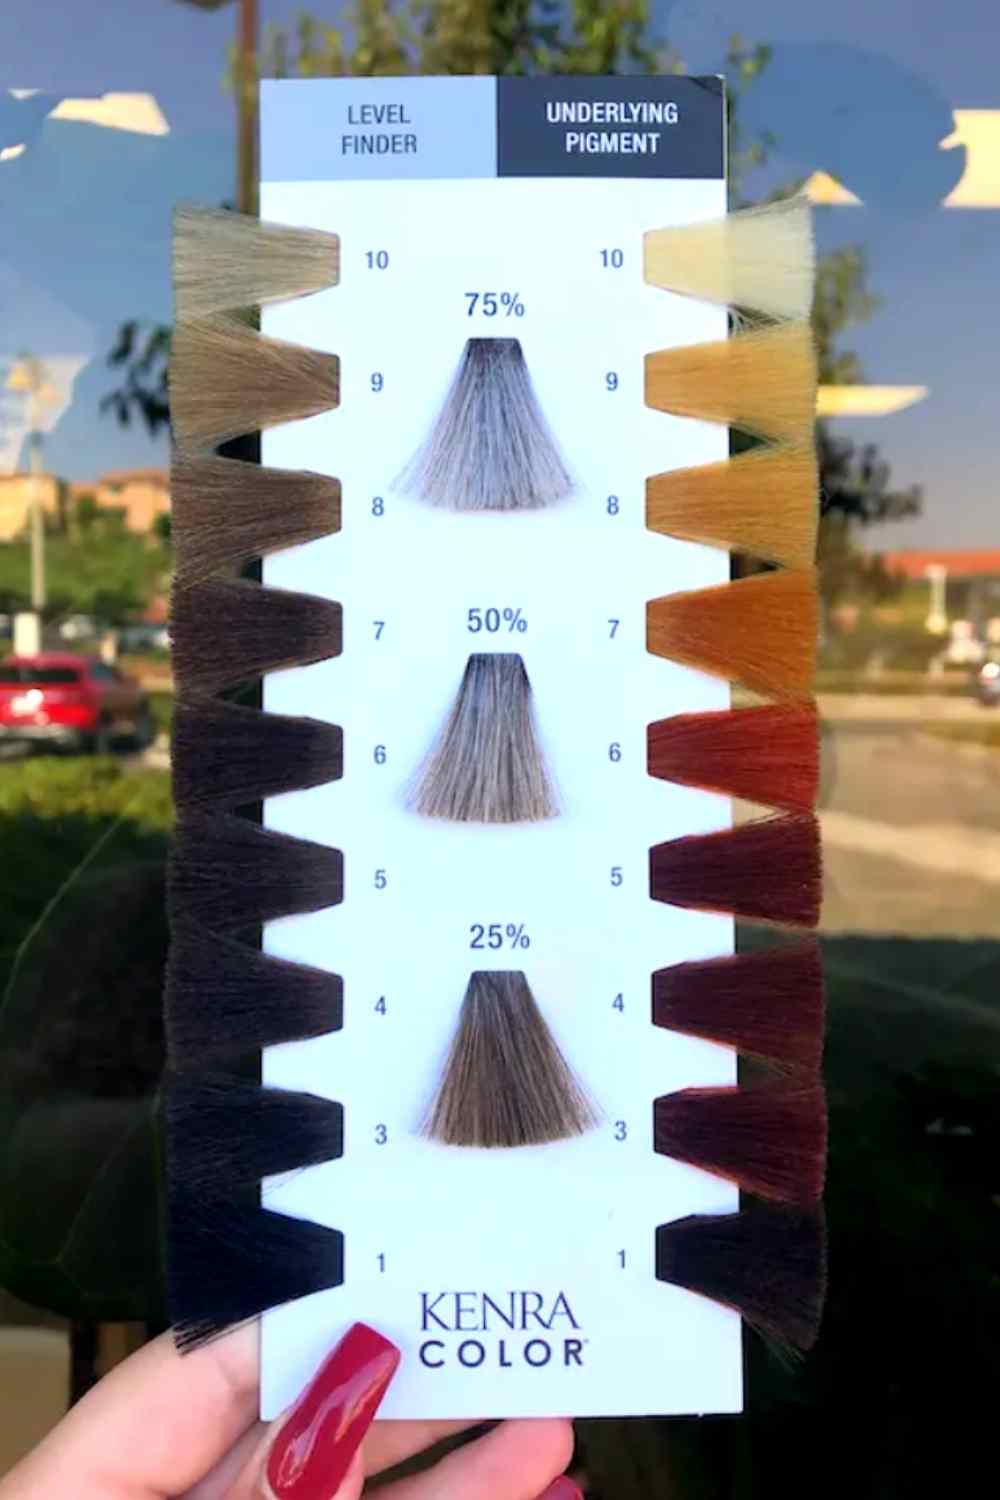 level finder and pigment chart - Mirella Manelli Hair Education